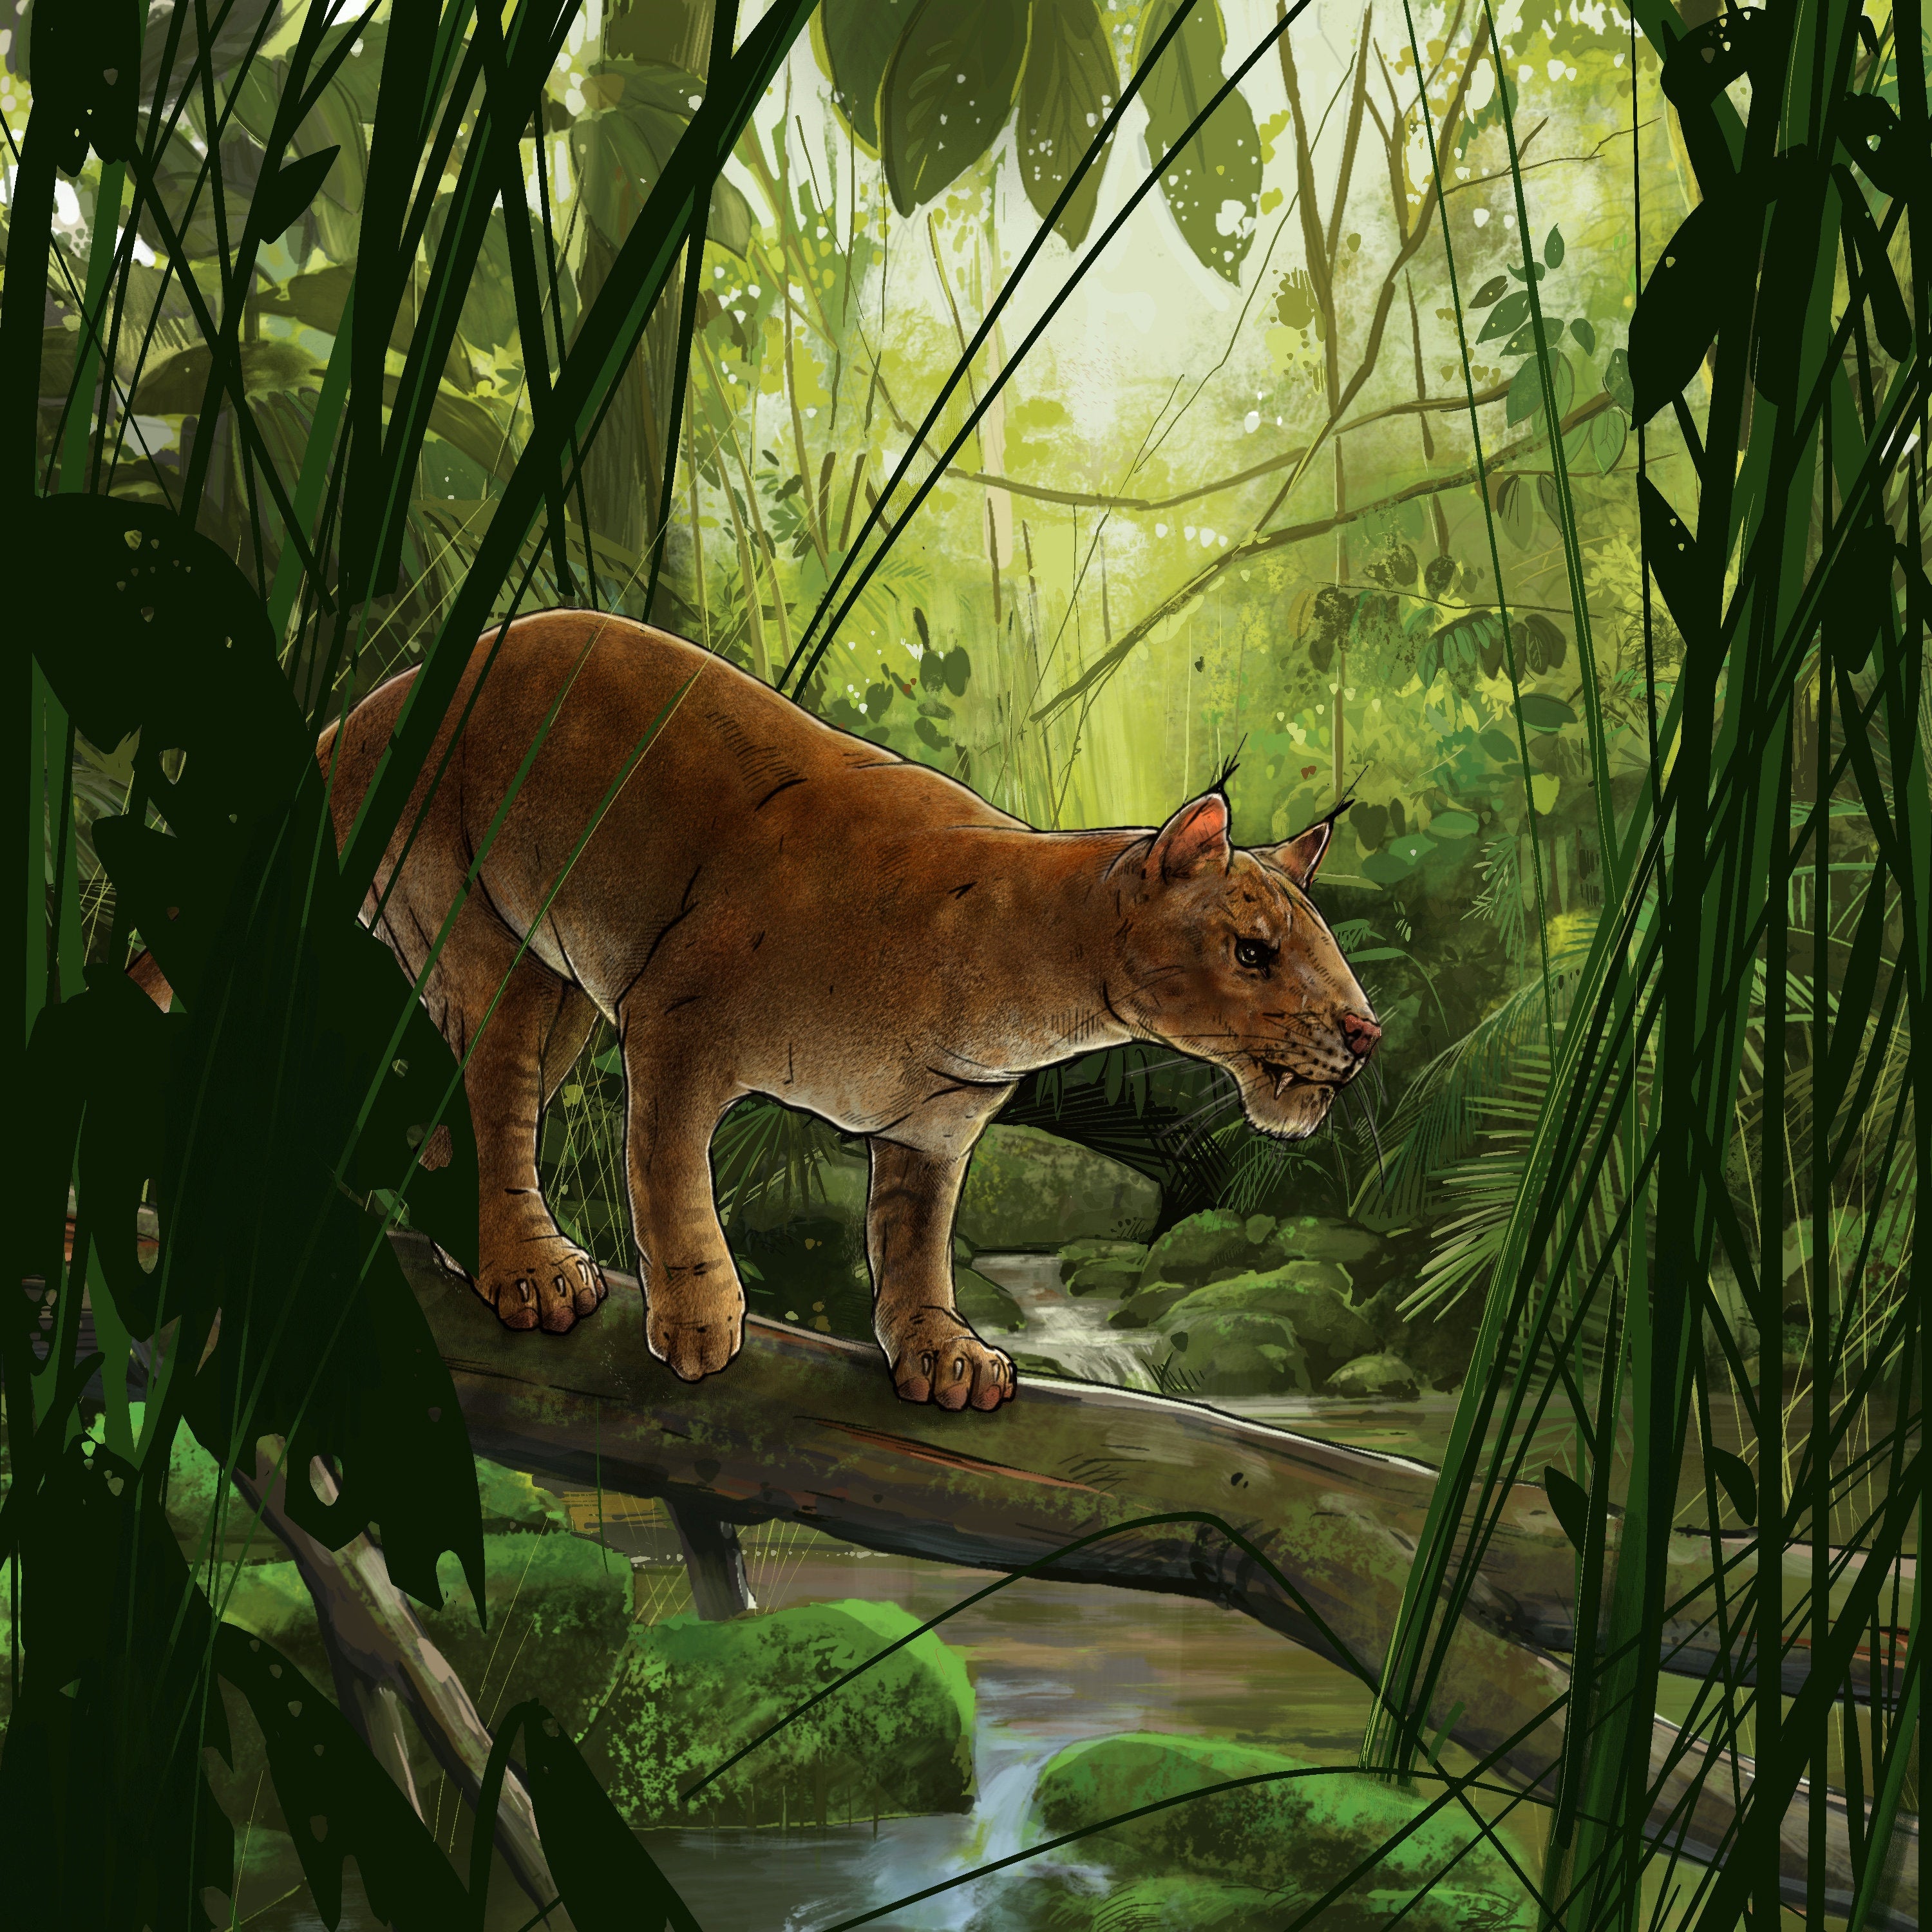 Cats evolved from a fierce sabre-toothed predator that prowled North America 42 million years ago